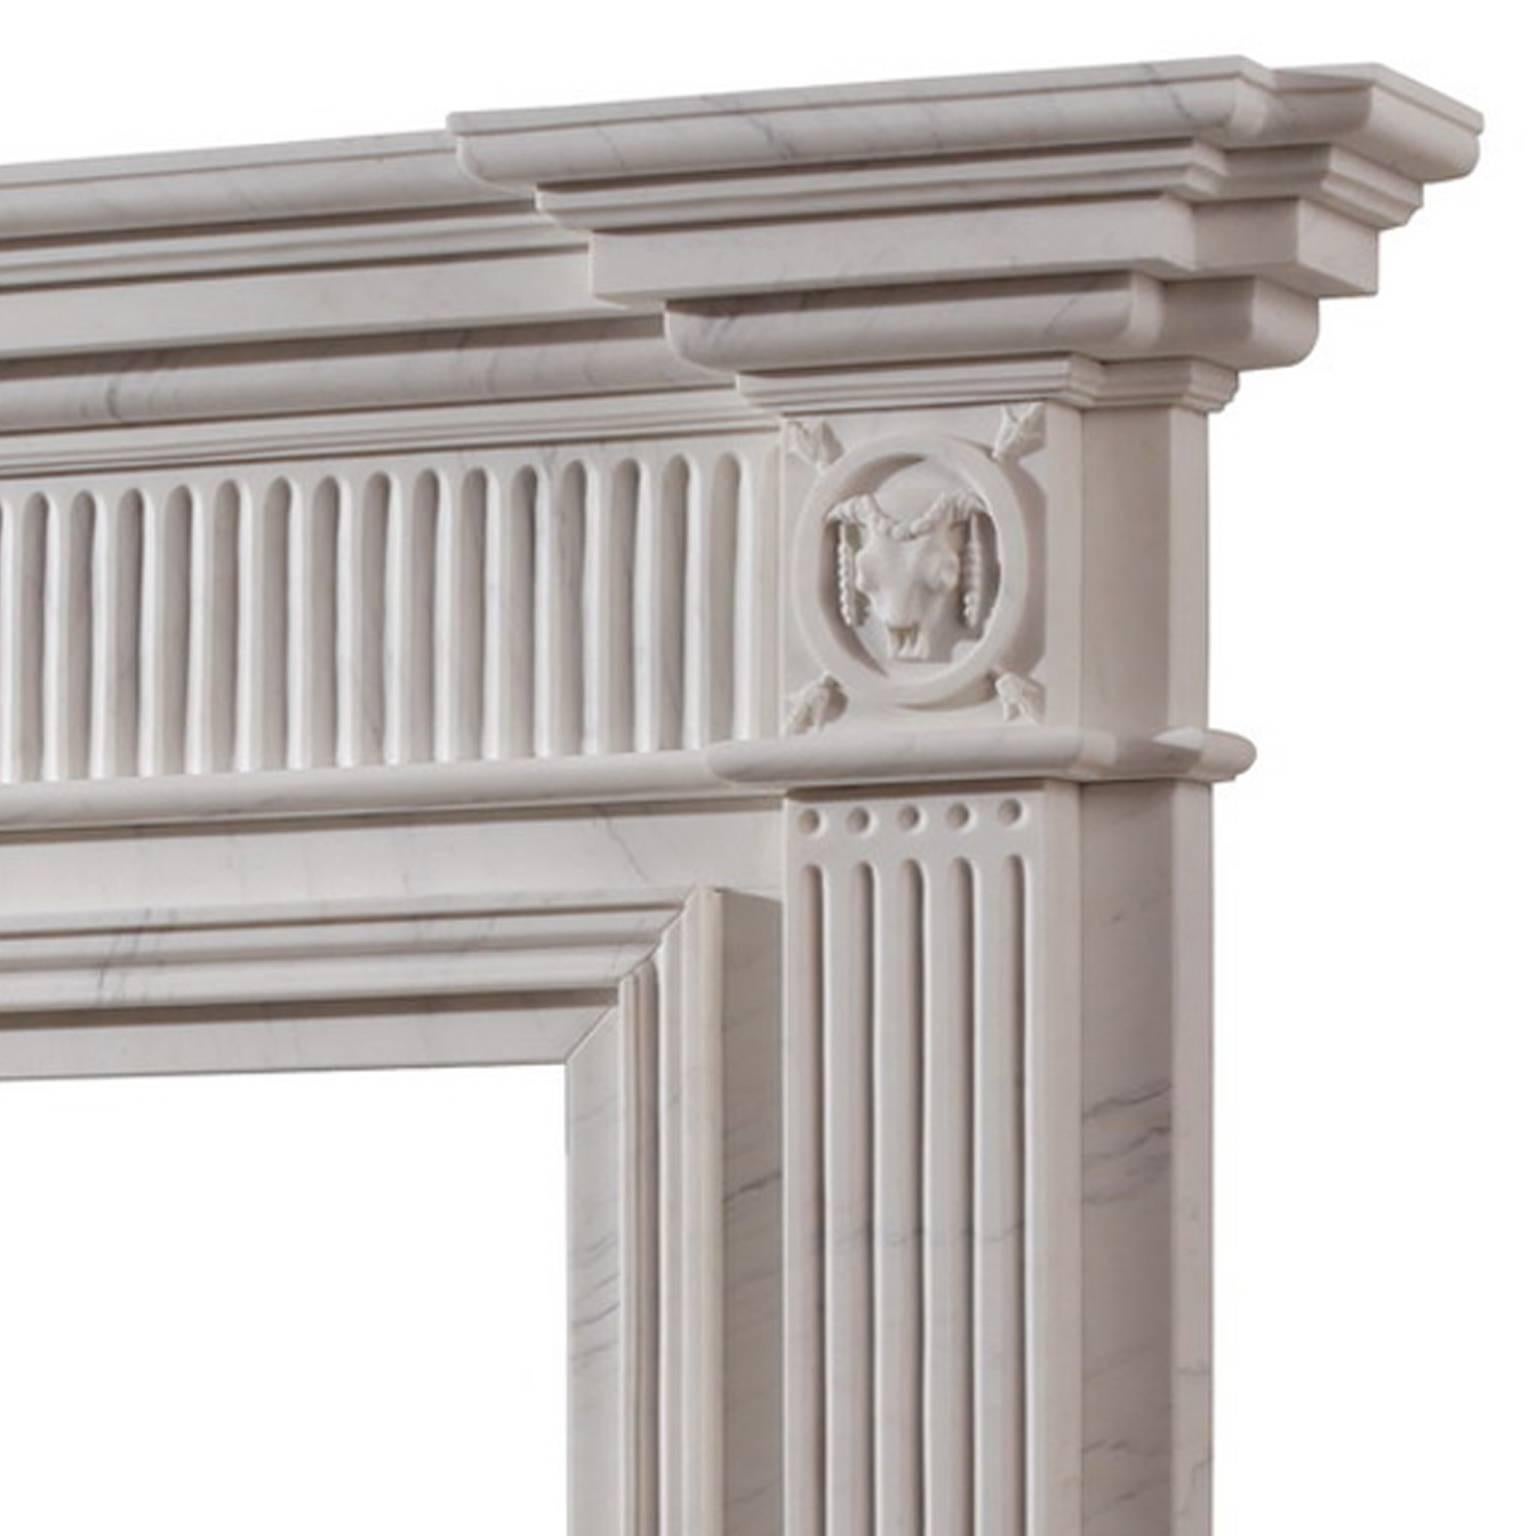 Unique fireplace produced under license from Kenwood House Hampstead, London. This modest, well proportioned and dignified creation in imperial white statuary marble takes its inspiration from the chimney-piece in the entrance hall at Kenwood house.